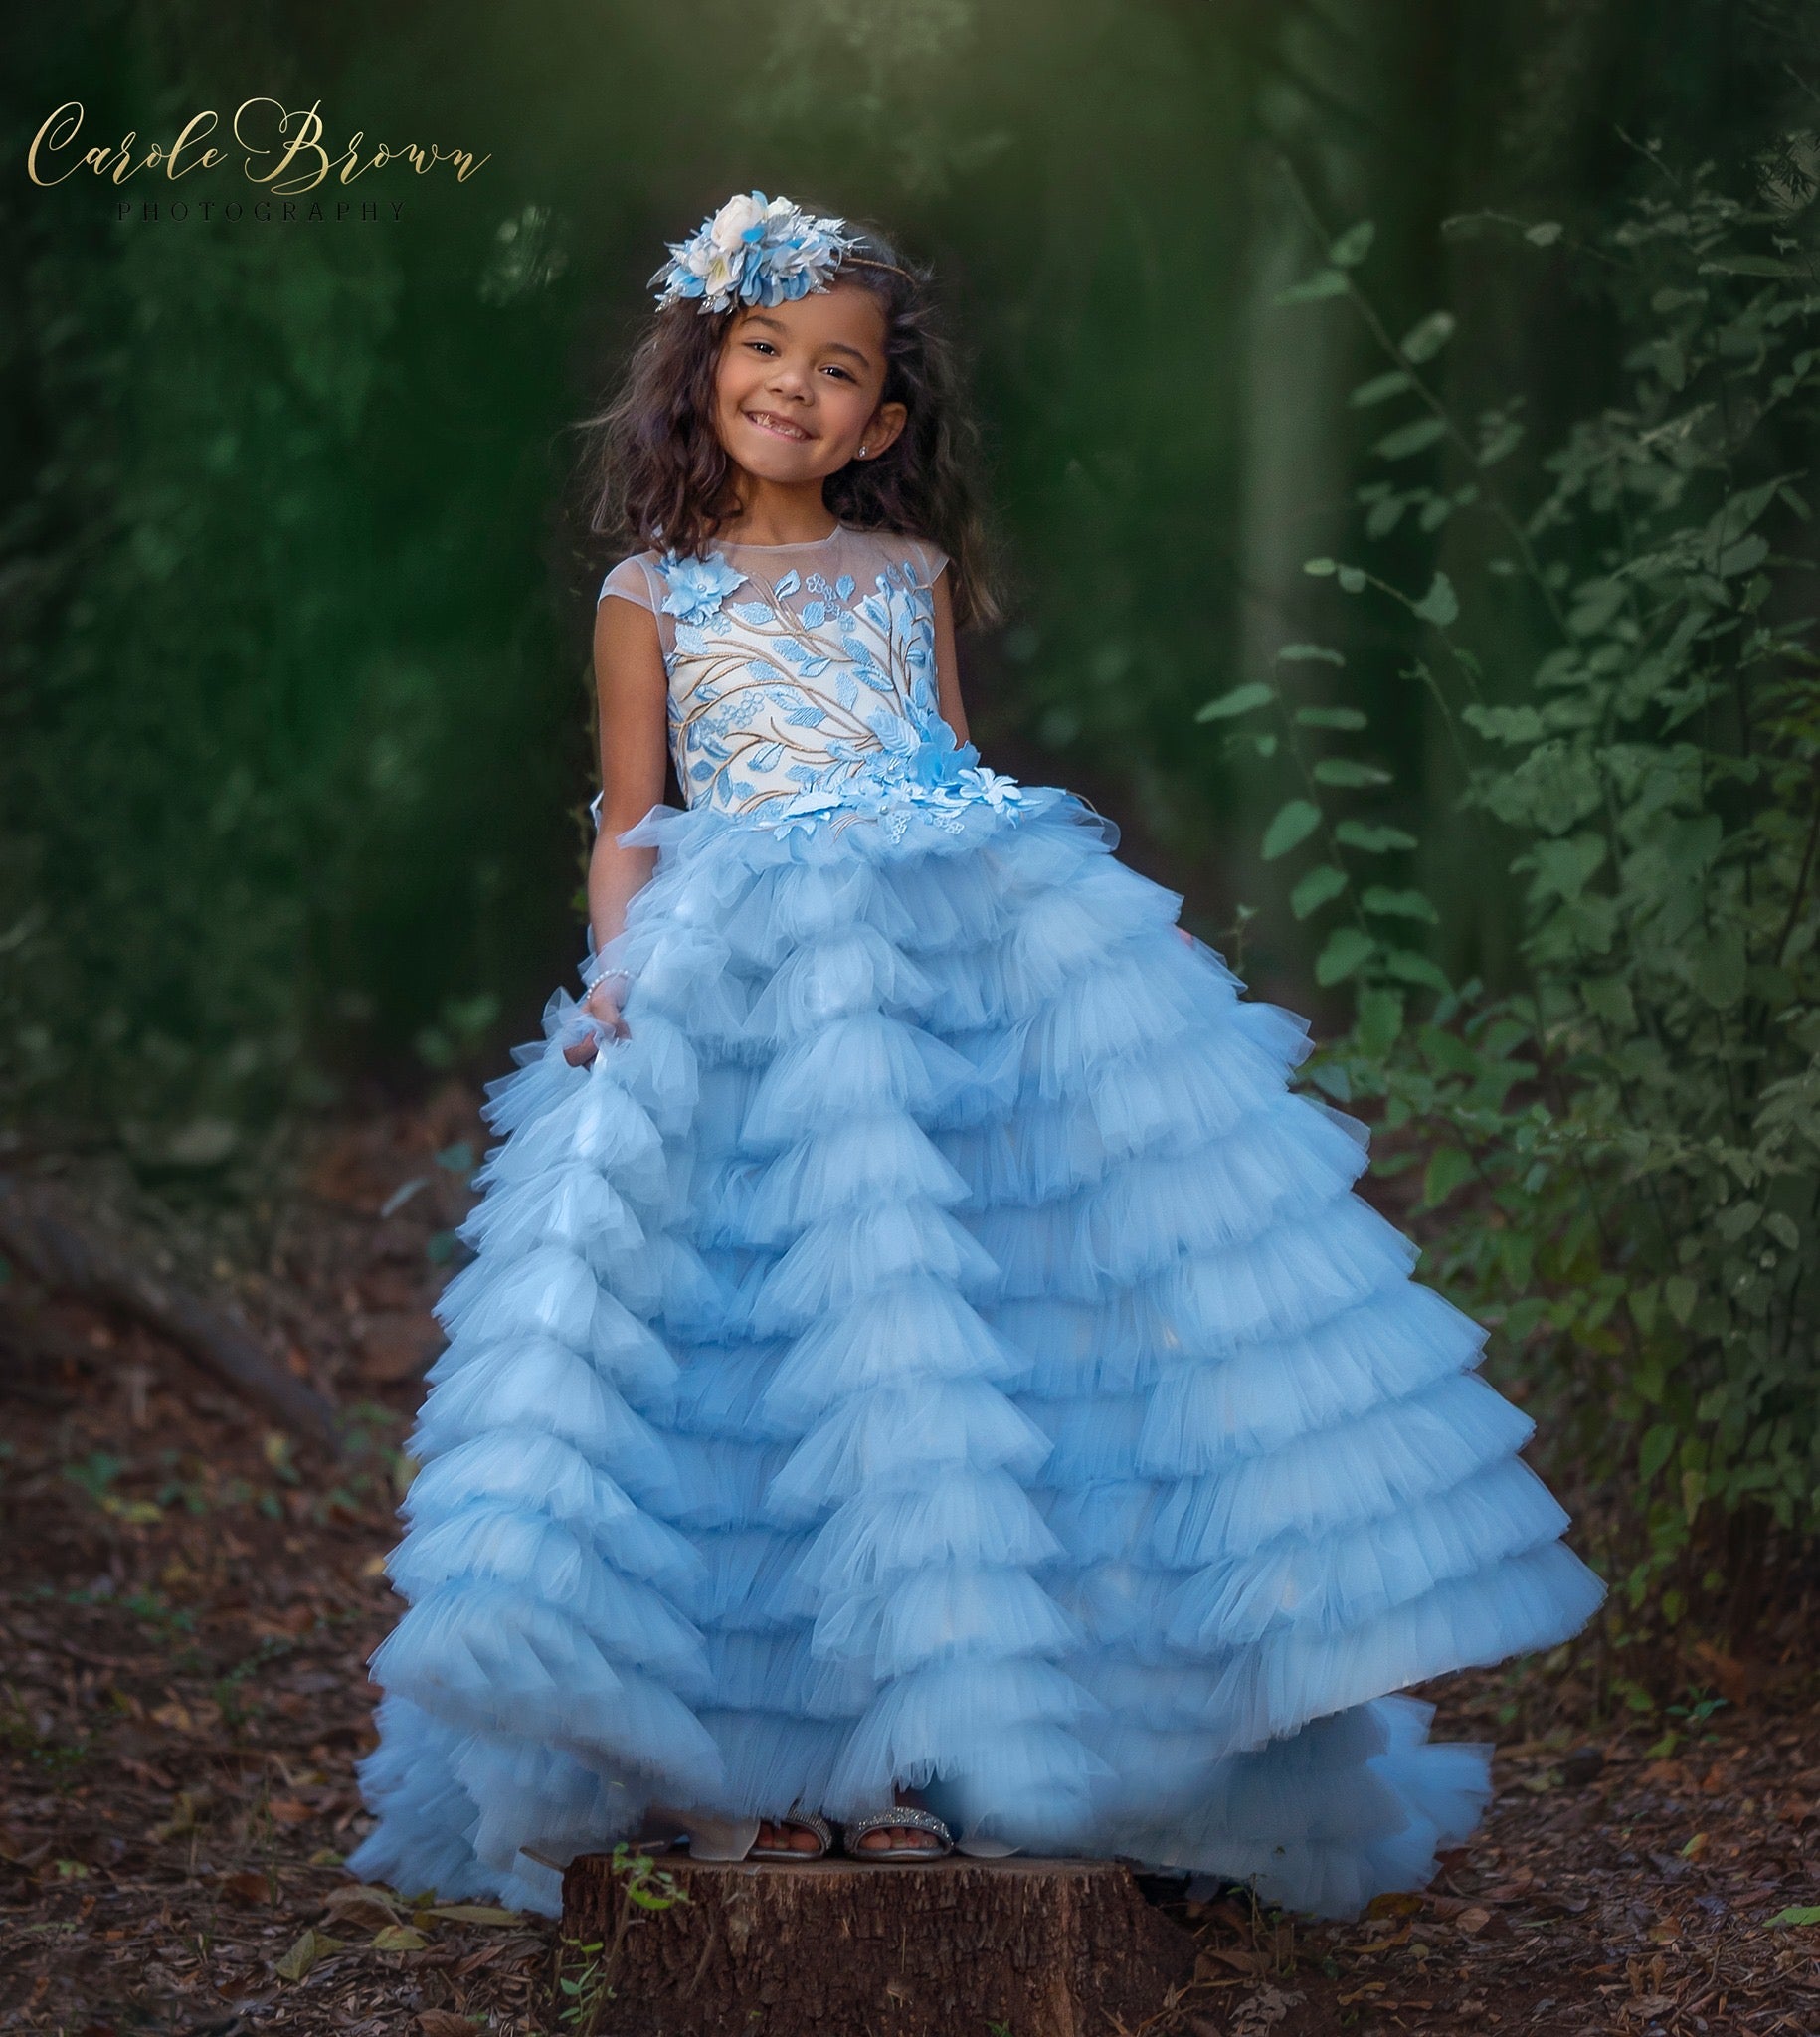 Pretty girl wearing Electra Flower Girl Lace Couture Dress-by Miele Moda Boutique